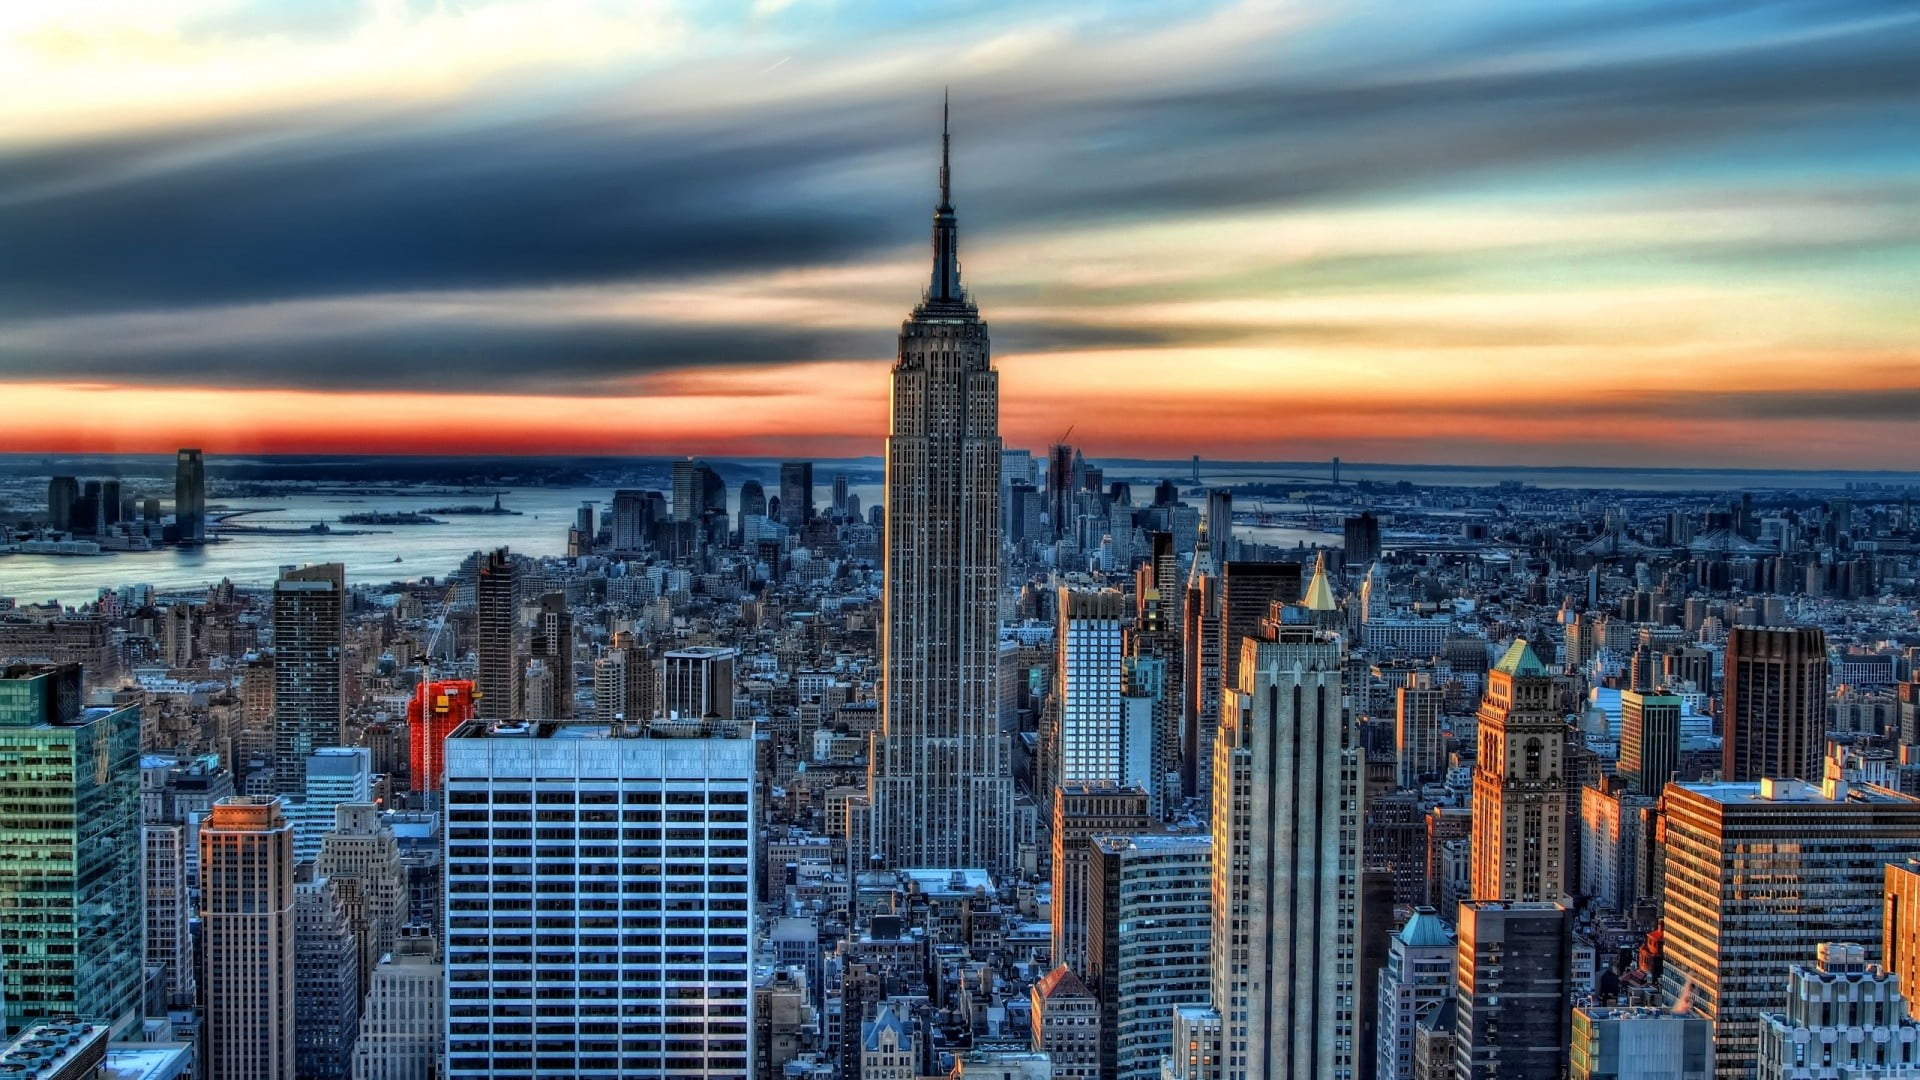 Empire State Building, New York, architecture, cityscape, clouds